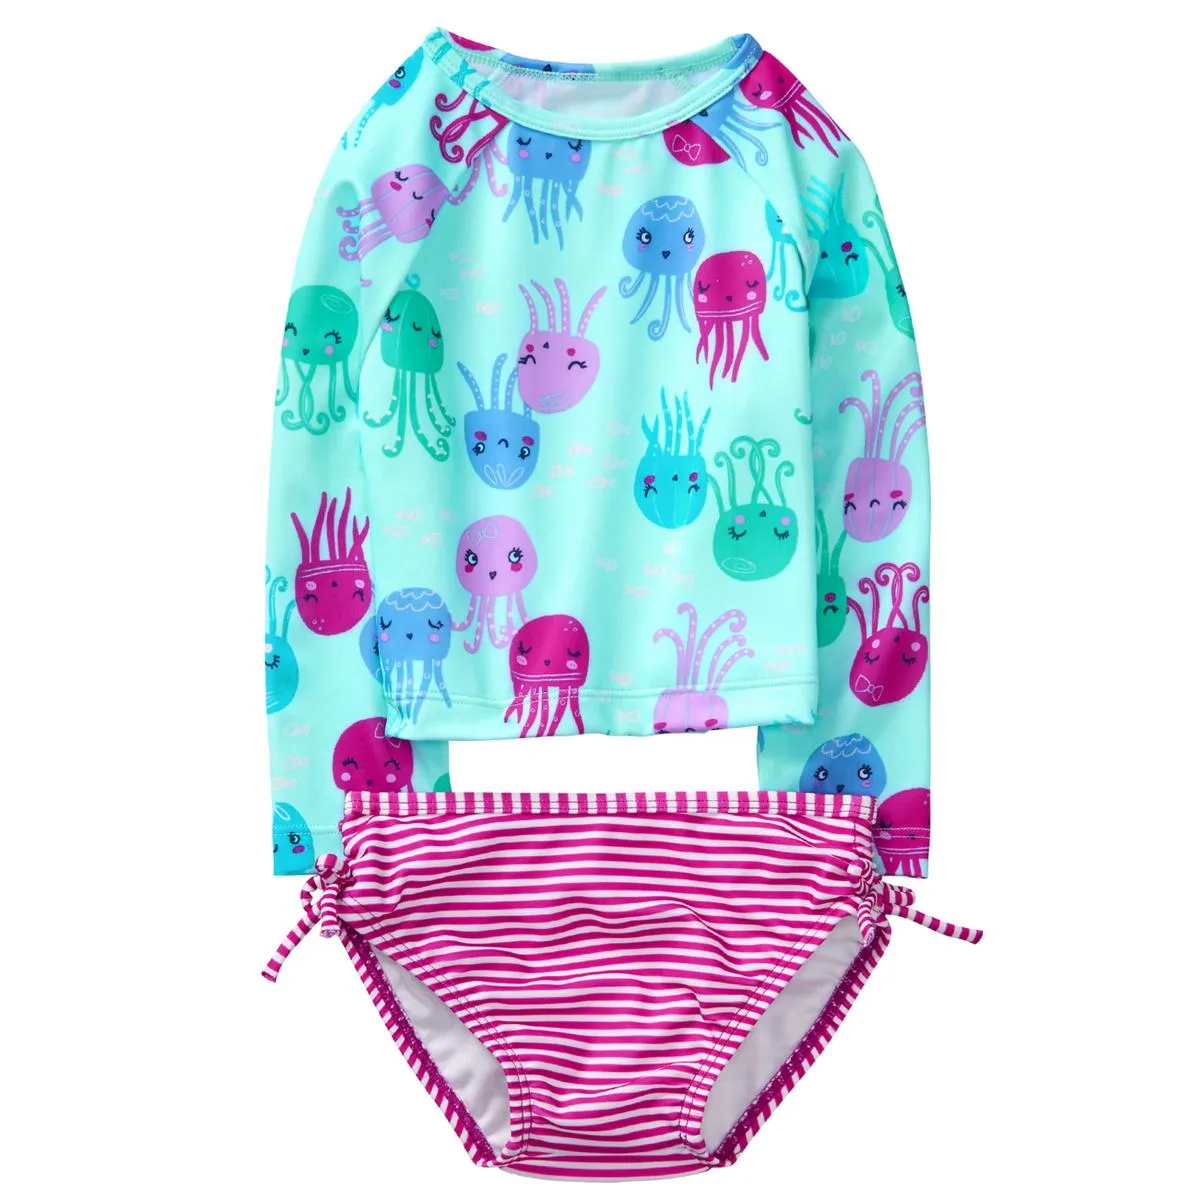 jelly Most Adorable Toddler Girl Swimsuits These are the most adorable toddler girl swimsuits I have seen this season. If you're planning on taking your toddler to the beach then check out these tips for a happy vacation.  There are super cute girl bathing suits to fit any budget.  This post does contain affiliate links, any purchase you make doesn't cost you anything and helps support this site.